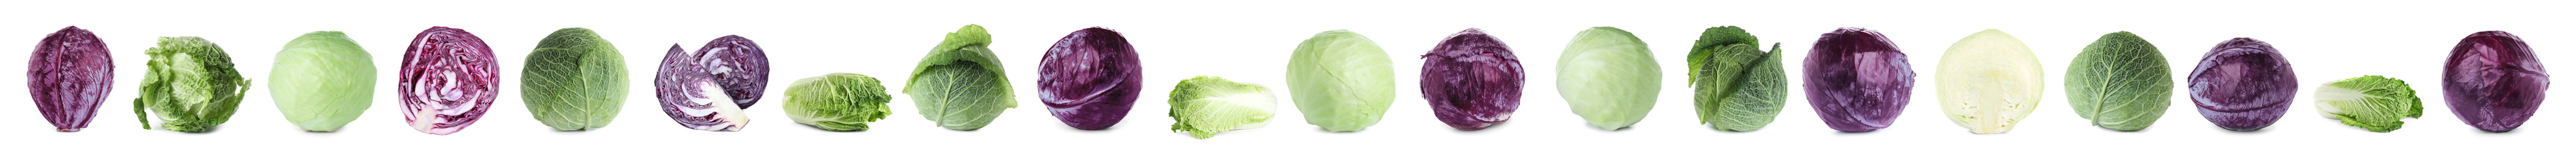 Set of different fresh cabbages on white background. Banner design